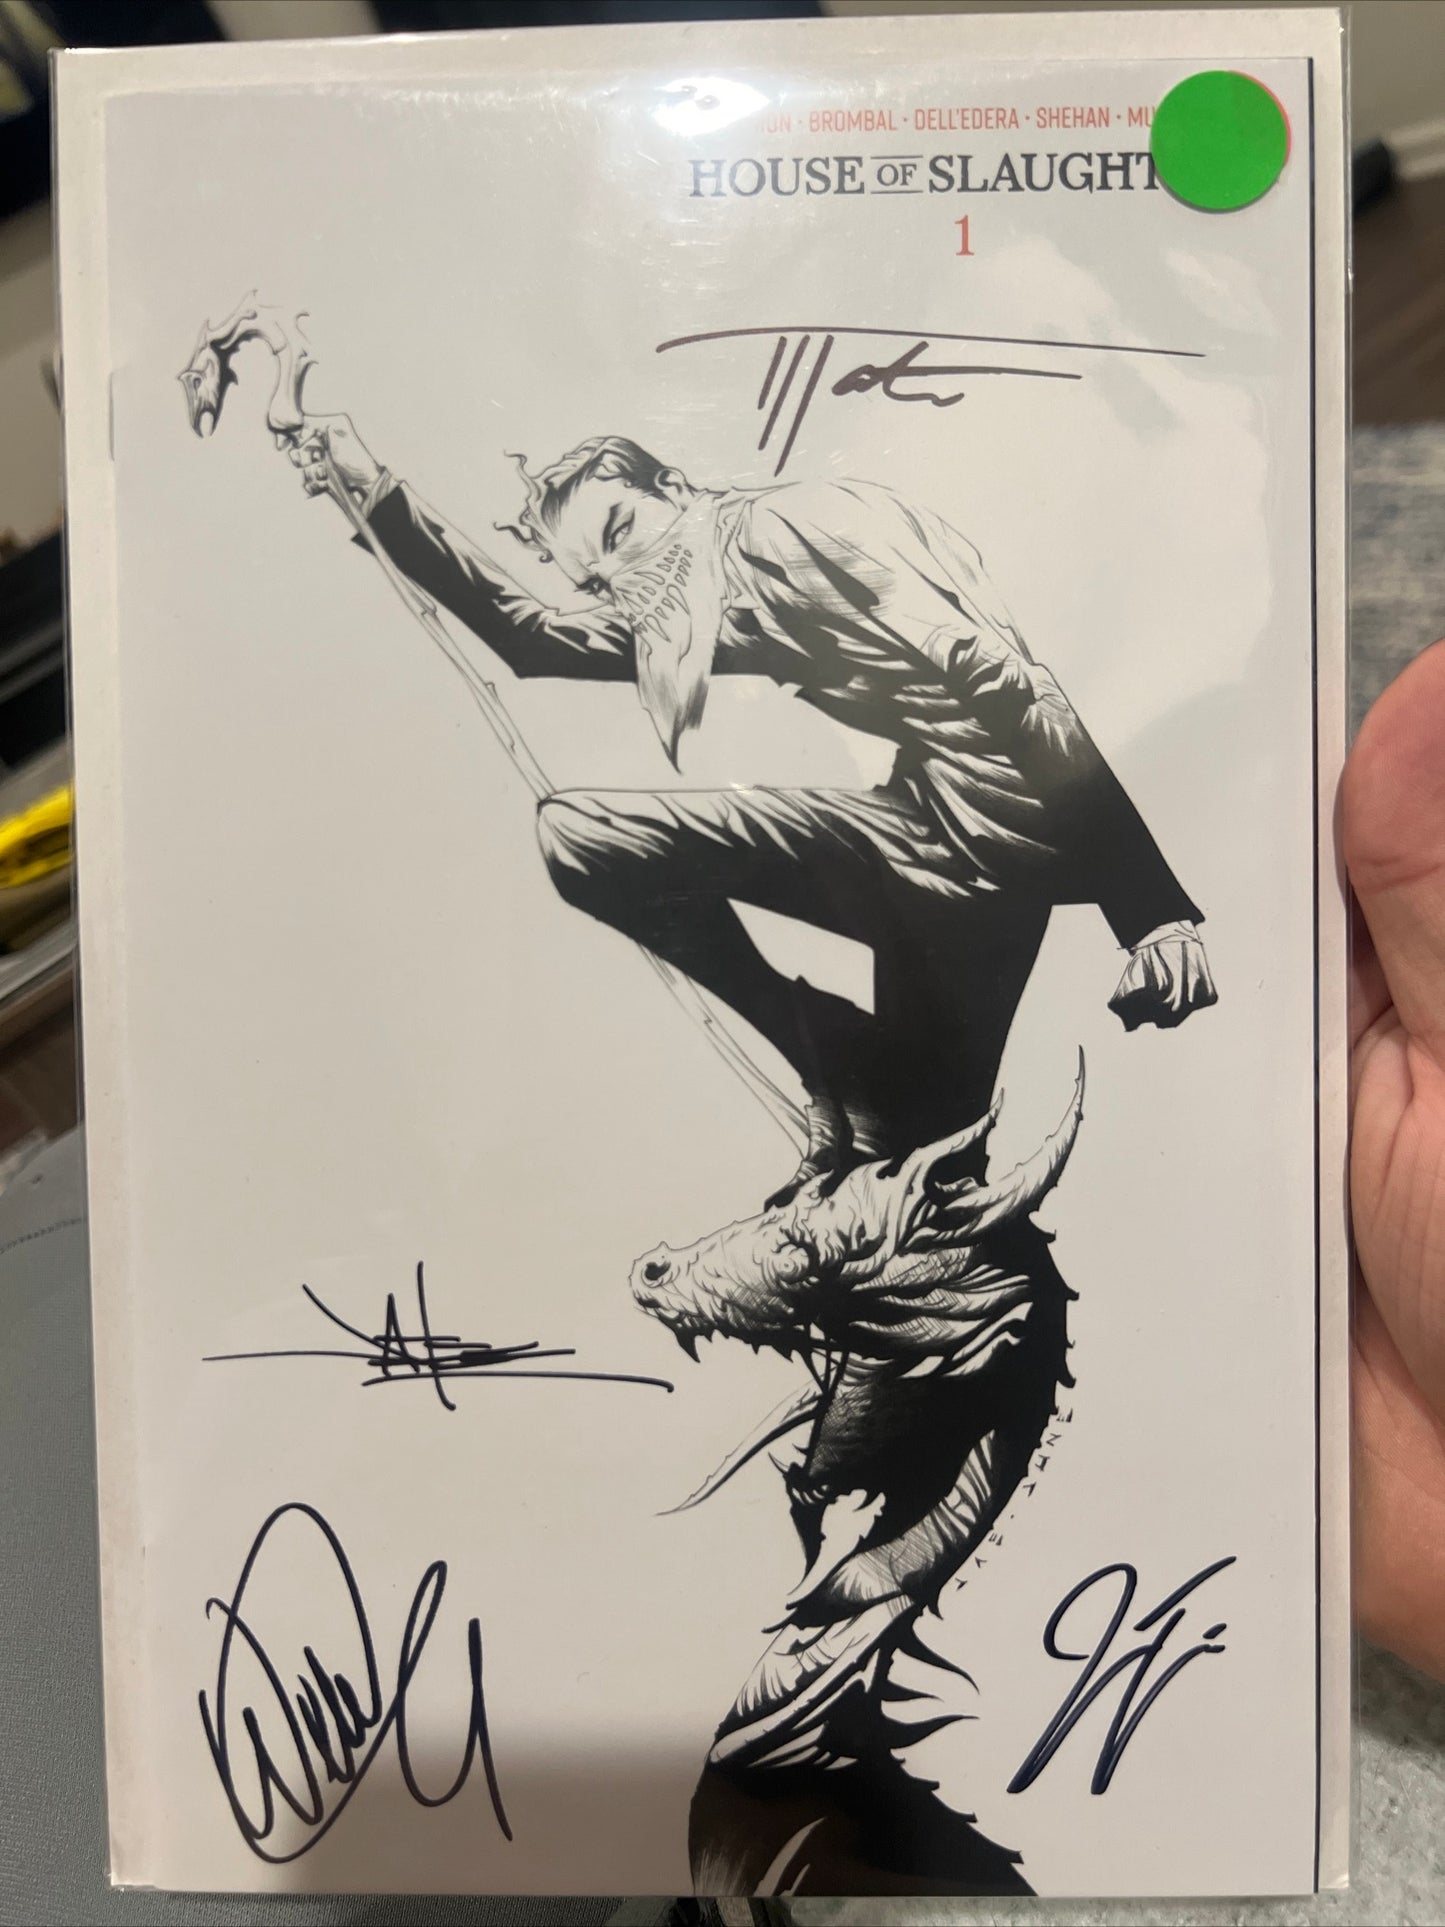 House of Slaughter #1 (2nd Print LCSD) signed by Jae Lee, James Tynion, Werther Dell’Edra and Tate Brombale